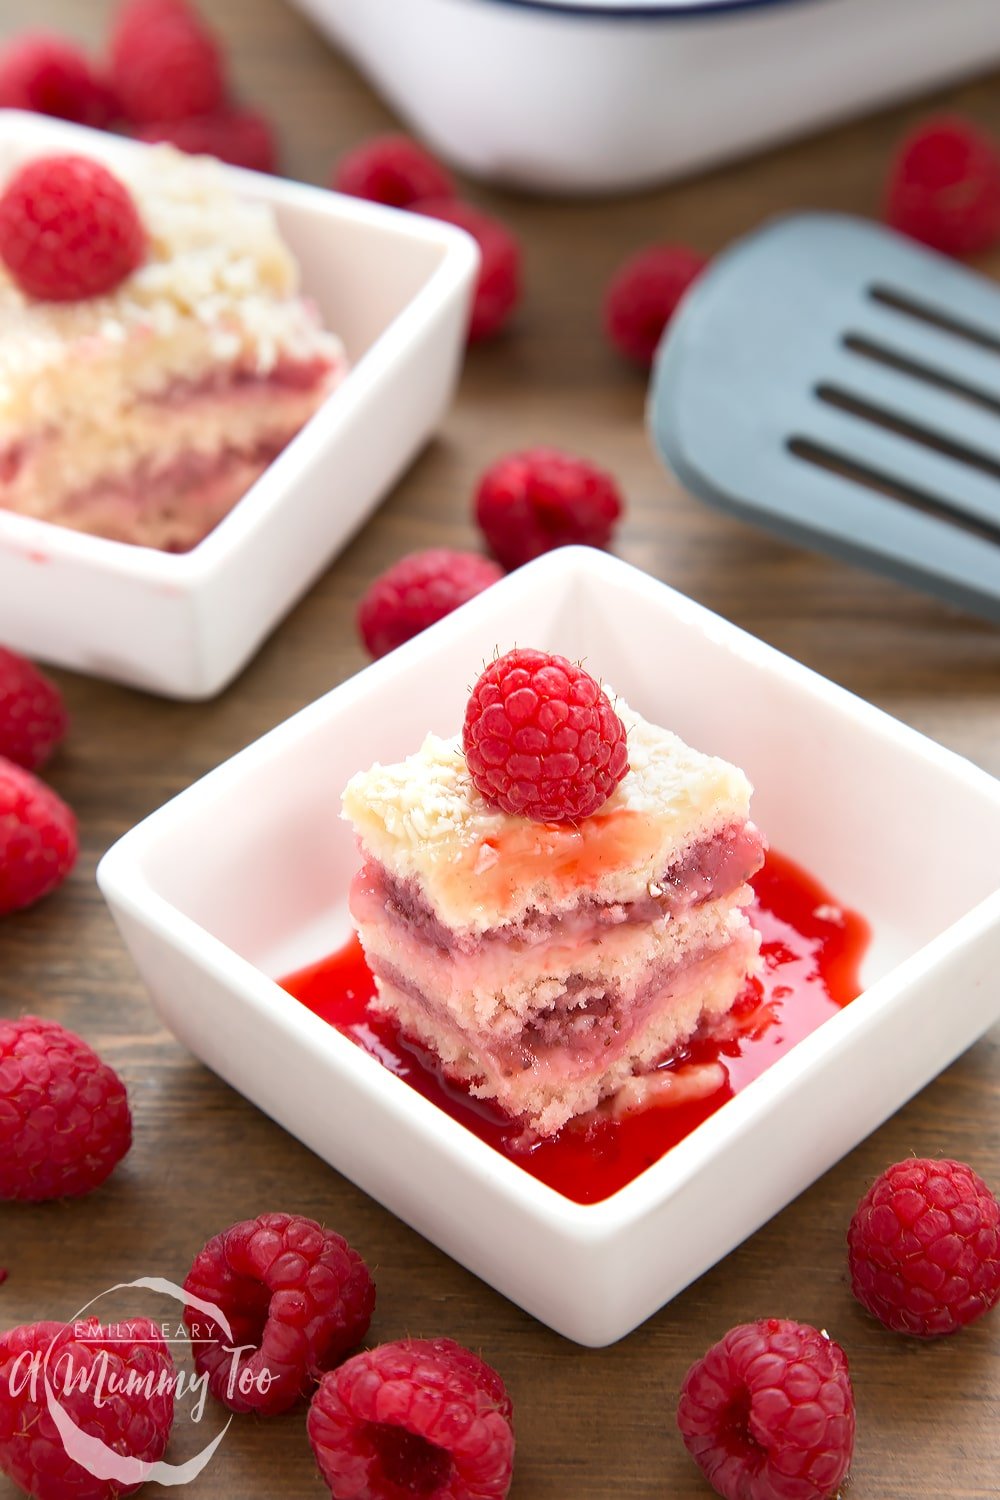 This strawberry lasagne is actually a layered strawberry custard cake! Find out how to make this adorable dessert